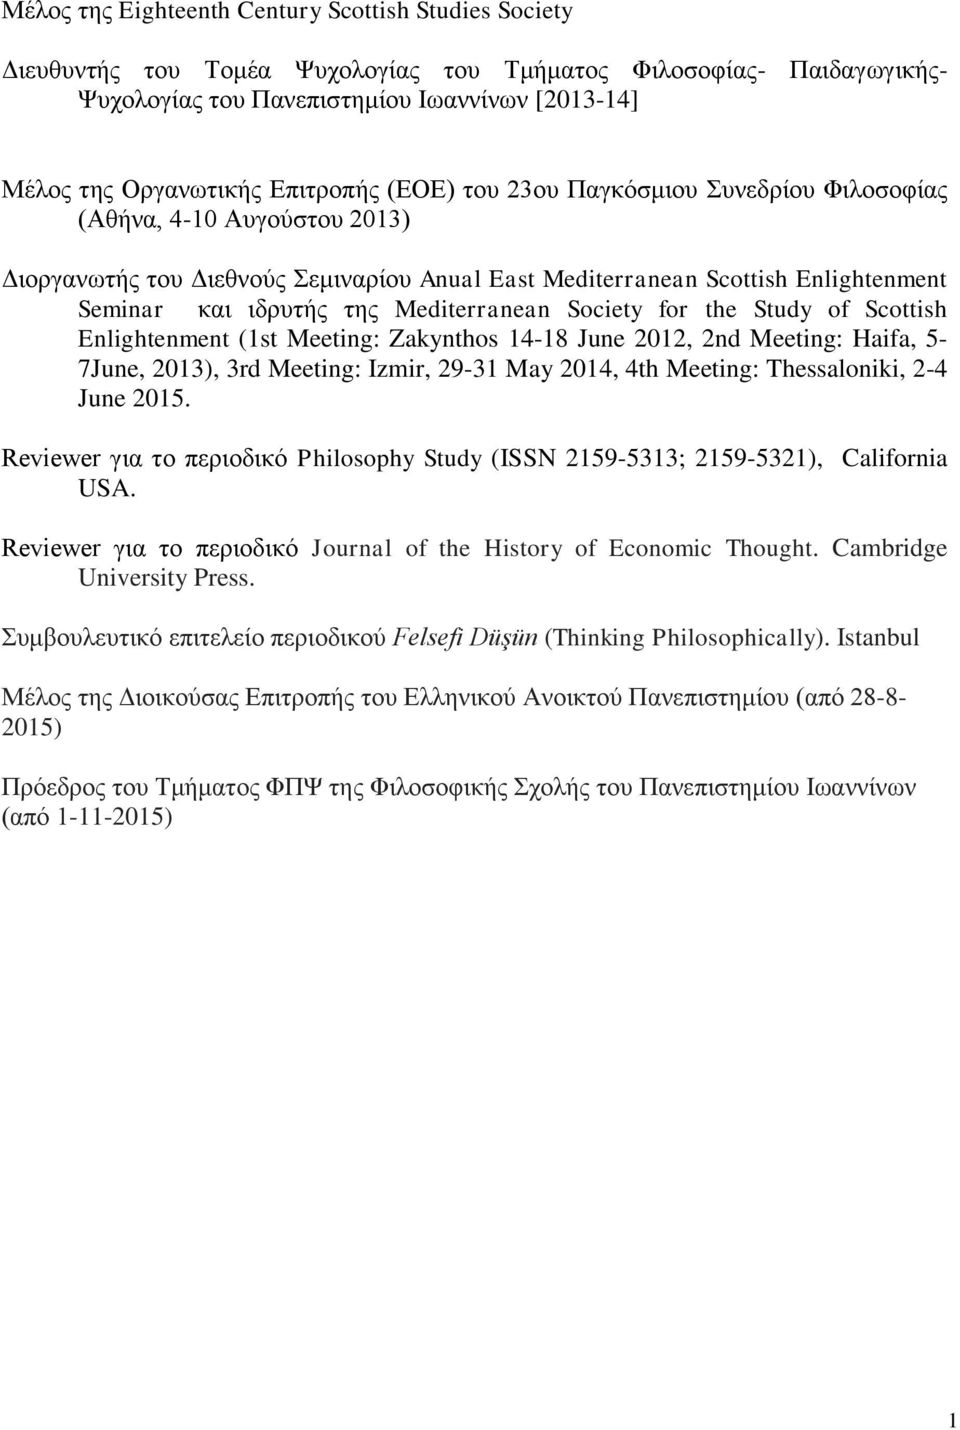 Mediterranean Society for the Study of Scottish Enlightenment (1st Meeting: Zakynthos 14-18 June 2012, 2nd Meeting: Haifa, 5-7June, 2013), 3rd Meeting: Izmir, 29-31 May 2014, 4th Meeting: